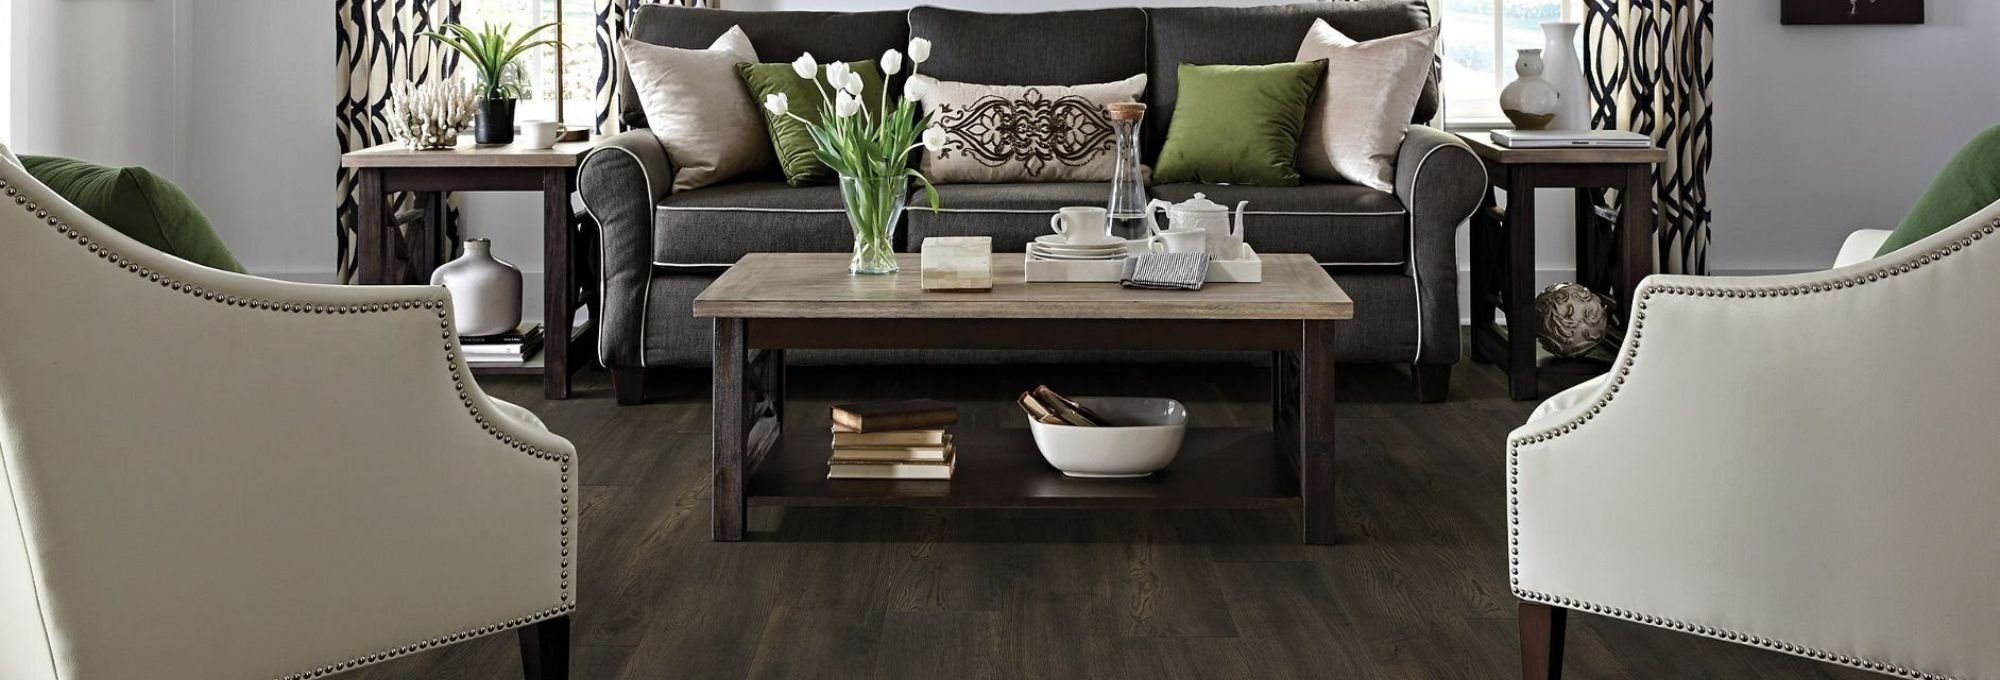 brown hardwood flooring for living room on Fort Morgan, CO area by Specialty Shoppe Floors